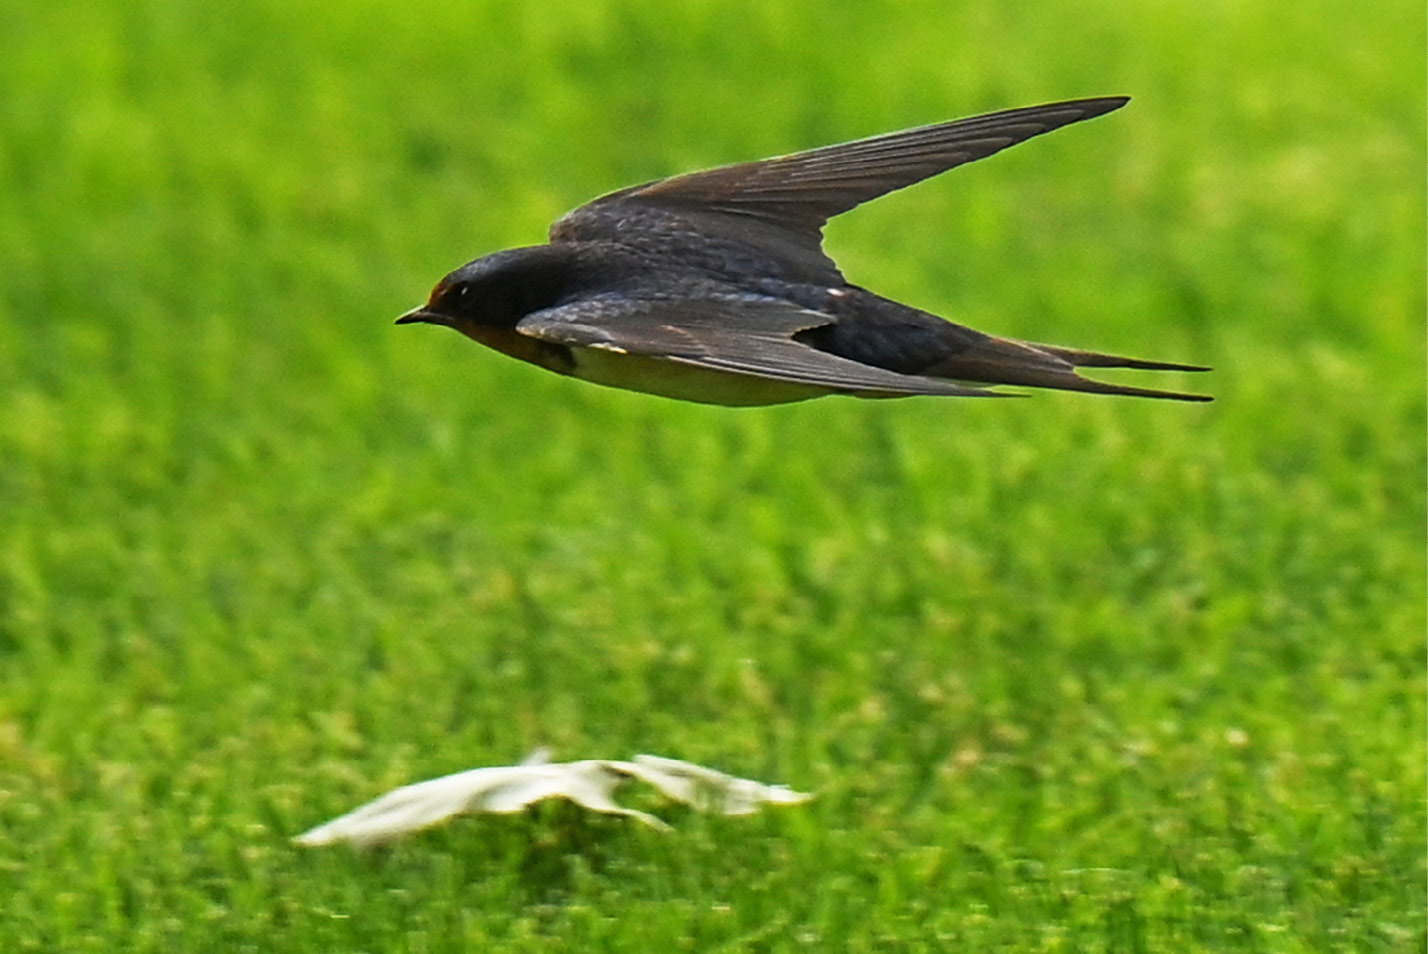 Close up of bird flying on campus